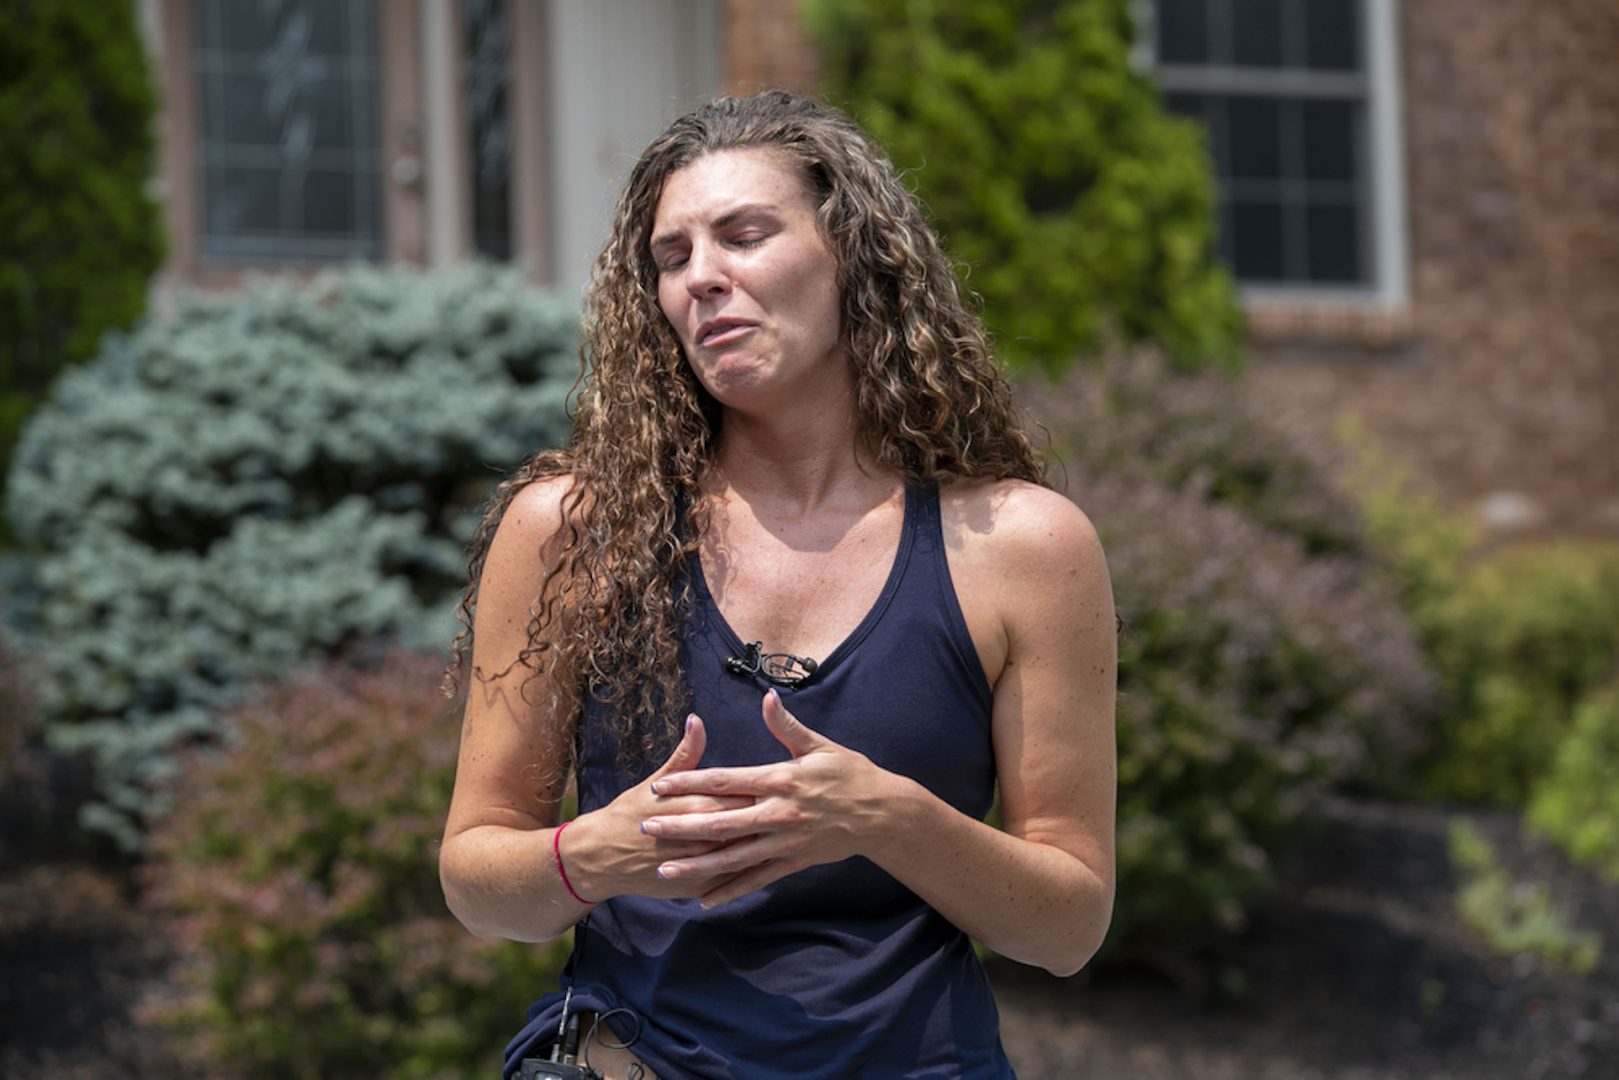 Brianne Shuller speaks to the media outside her Fishing Creek Valley home where Pennsylvania State Troopers shot and killed her husband, Mitchell James Shuller, on July 20, 2021.